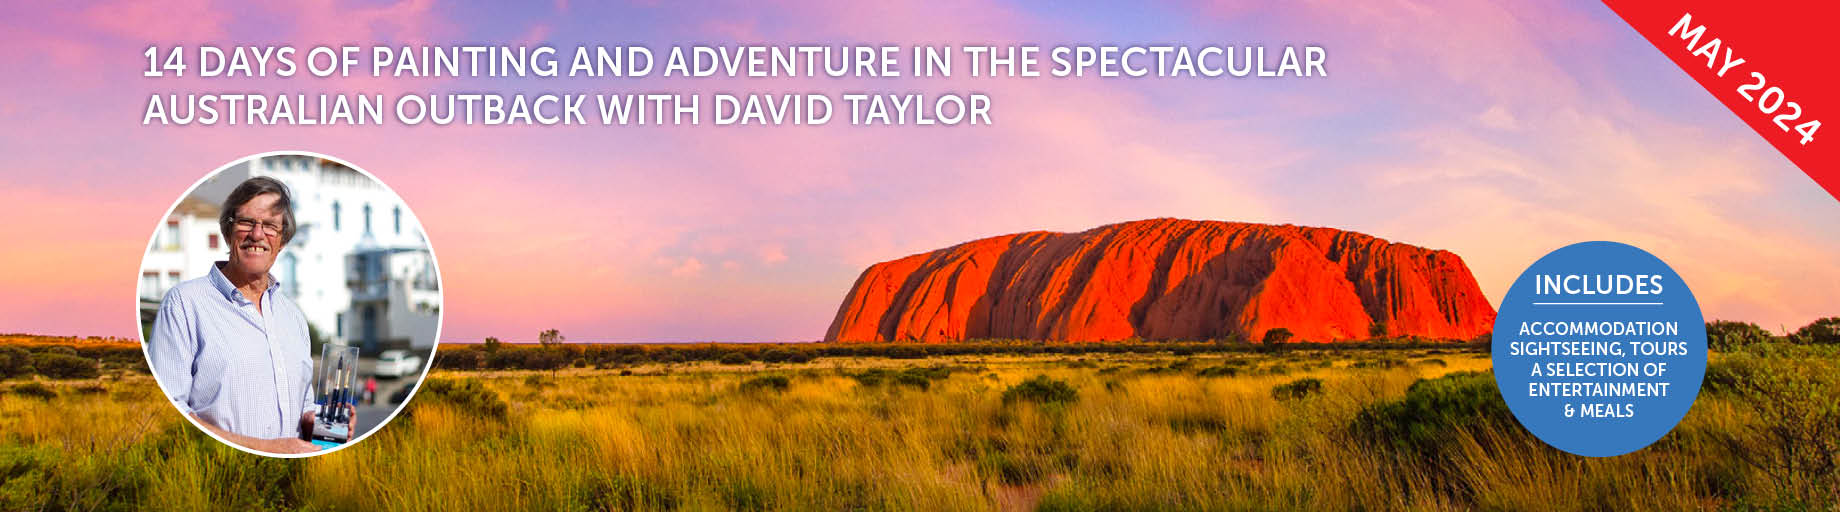 Central Australia Painting Worskhop with David Taylor